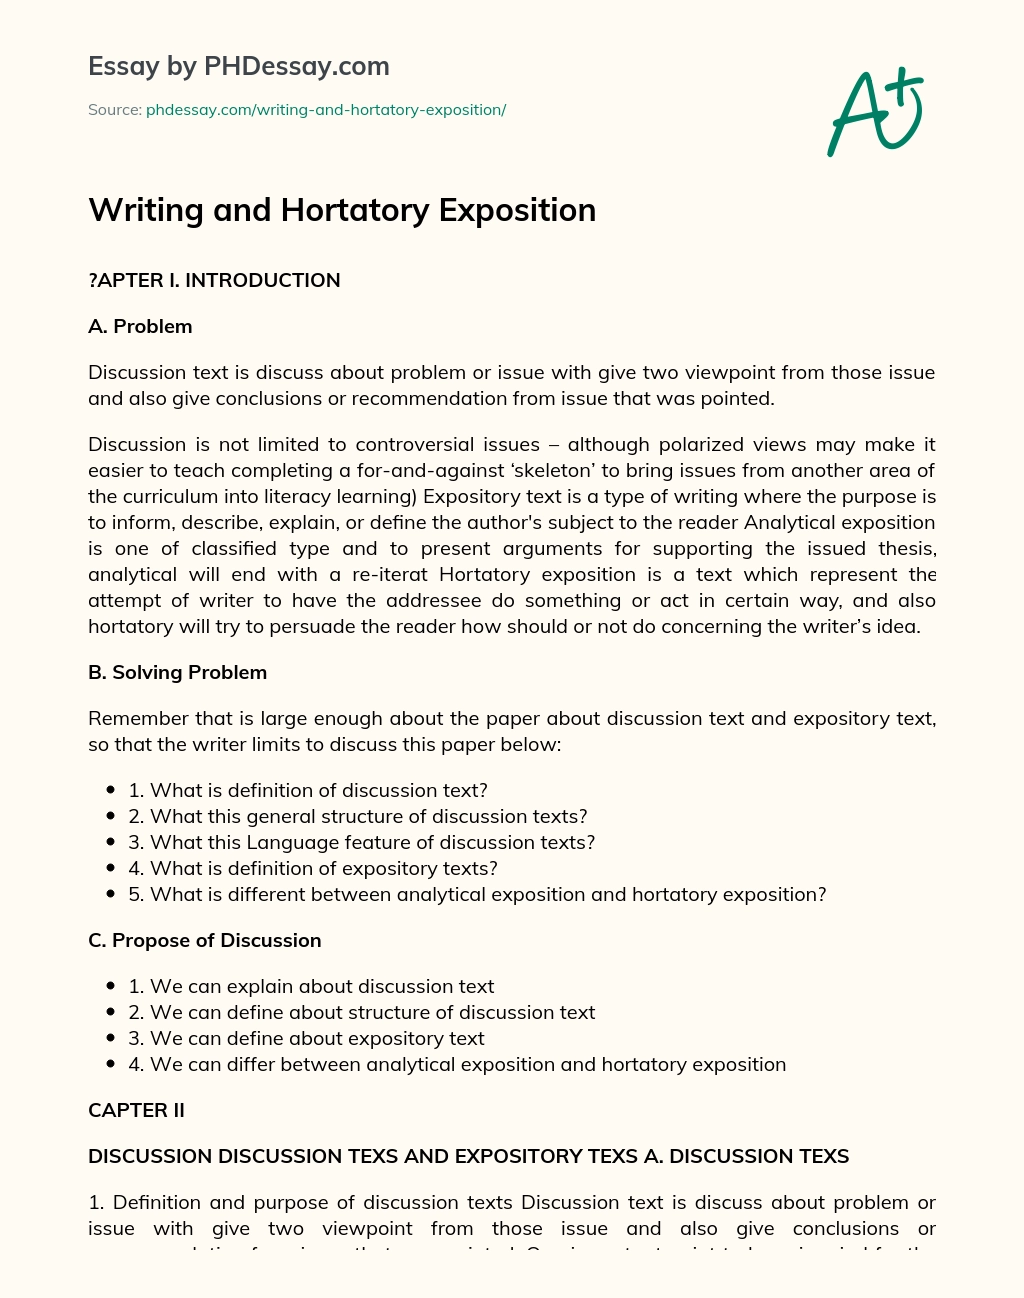 Writing and Hortatory Exposition